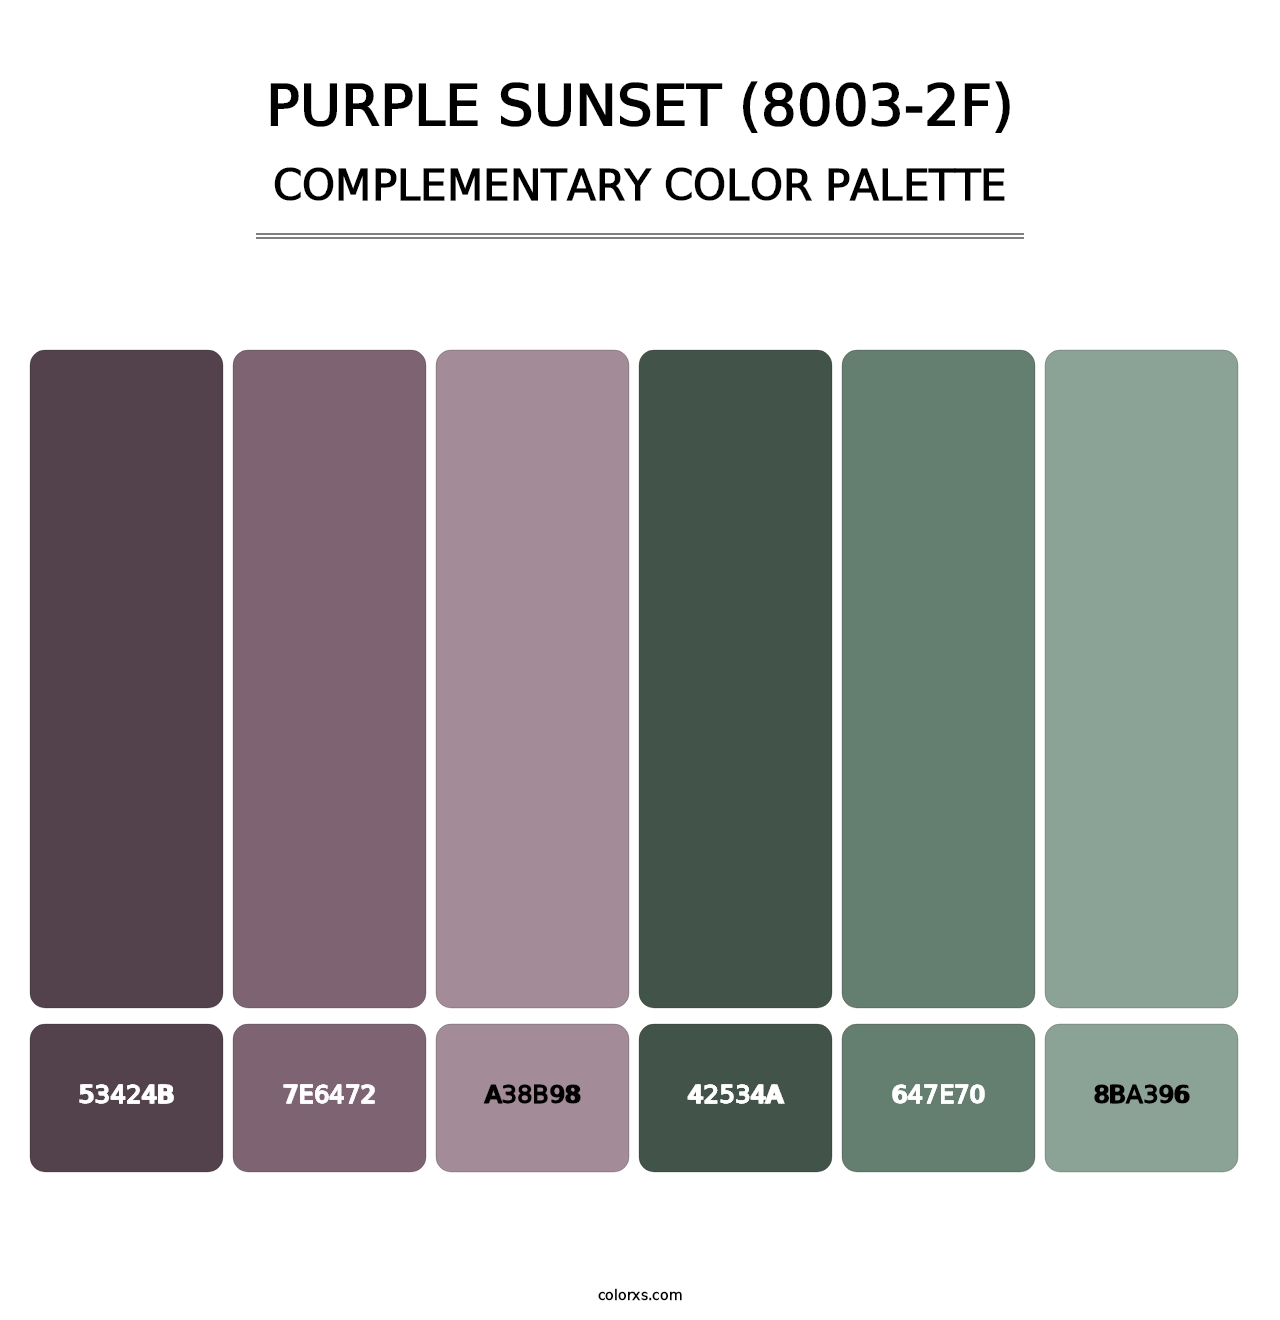 Purple Sunset (8003-2F) - Complementary Color Palette